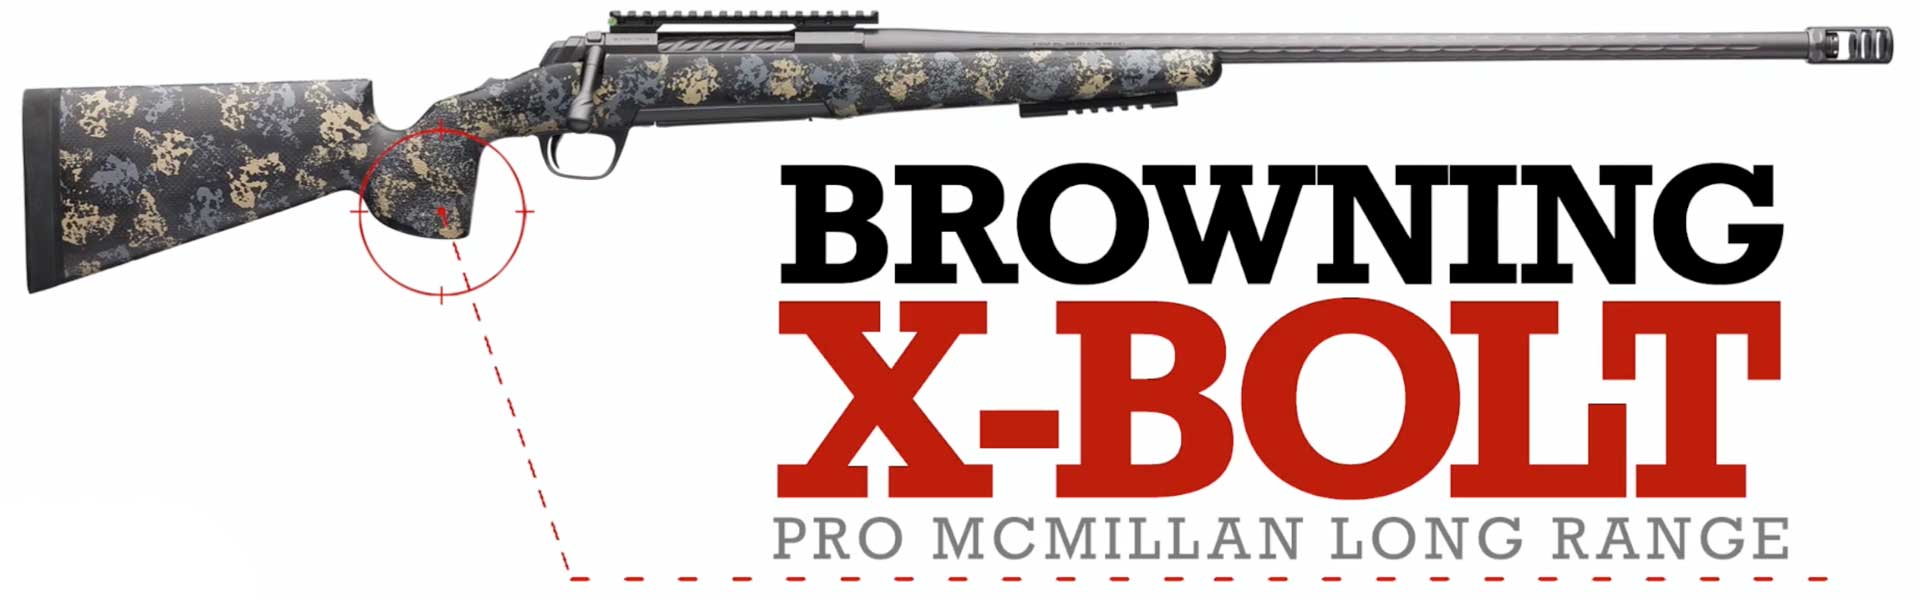 right side camouflage rifle bolt-action text on image noting "Browning X-Bolt Pro McMillan Long Range"